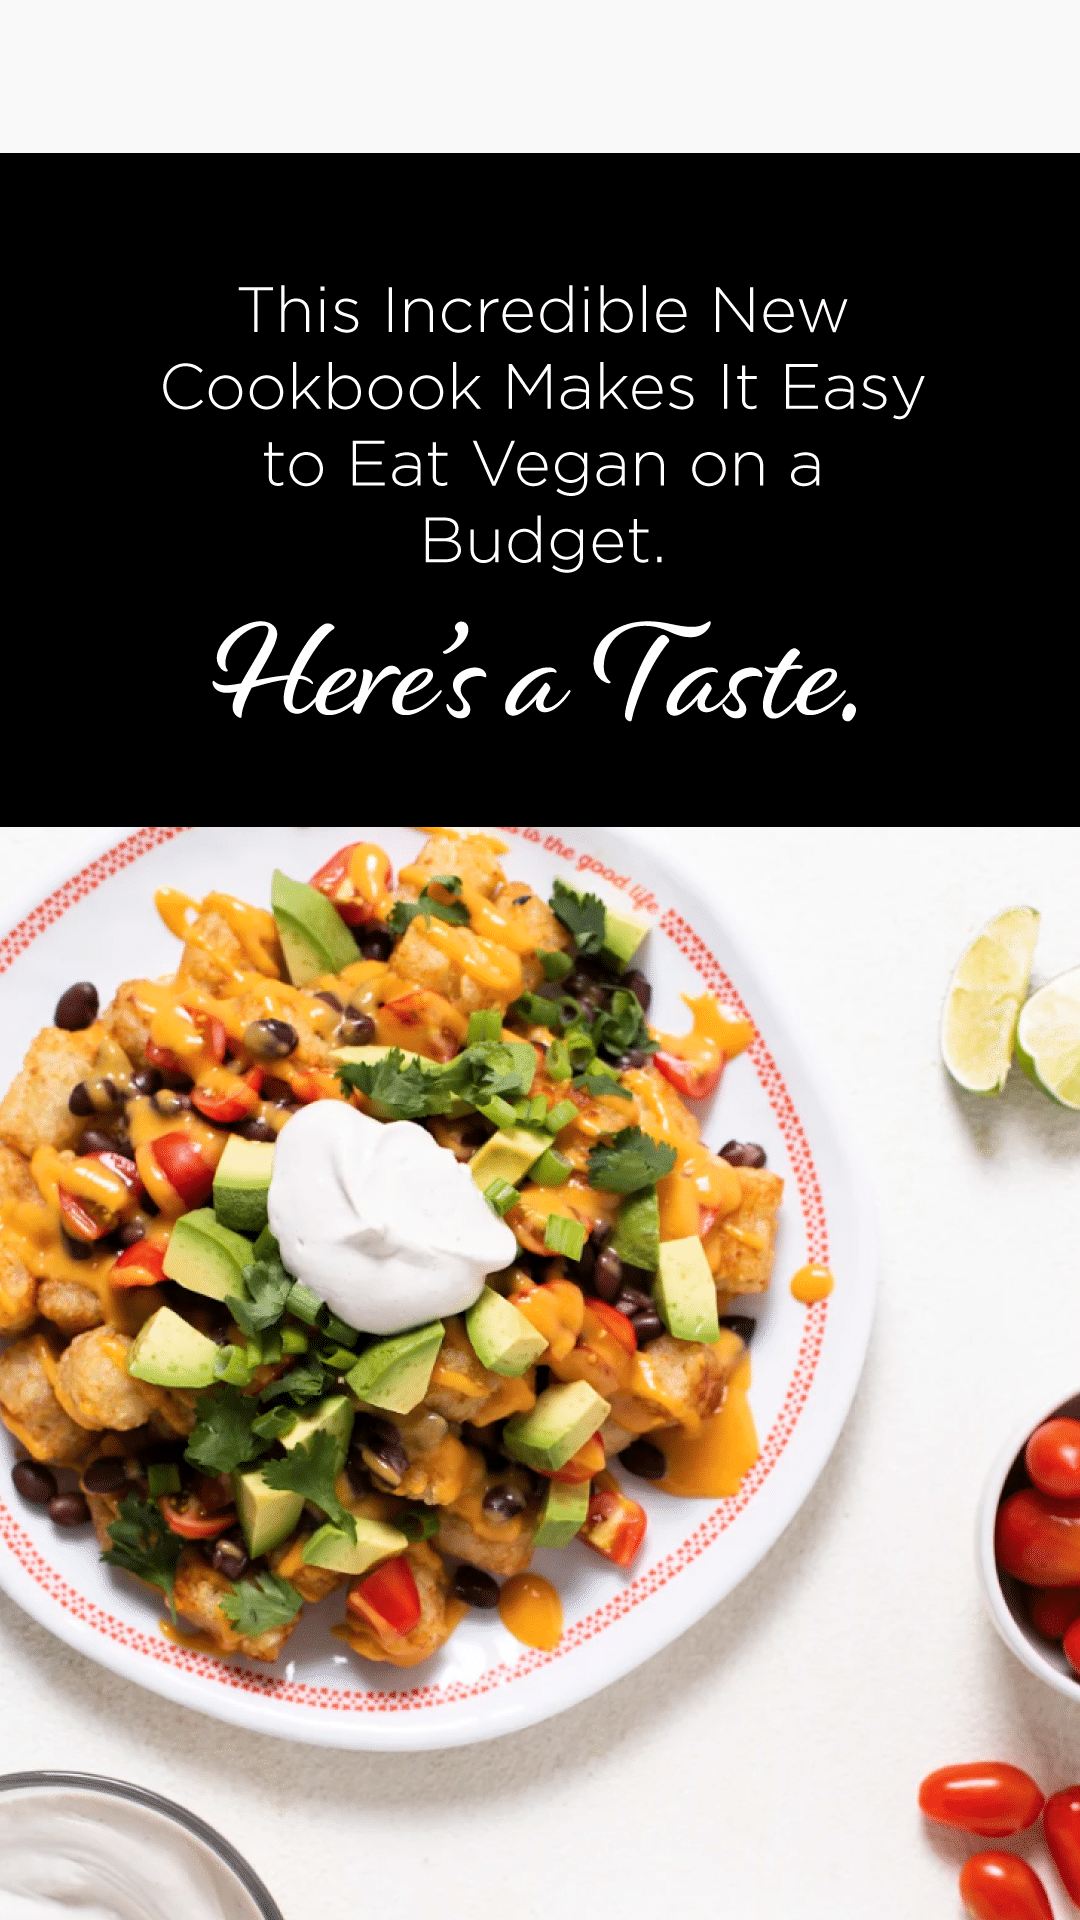 This Incredible New Cookbook Makes It Easy to Eat Vegan on a Budget. Here’s a Taste.